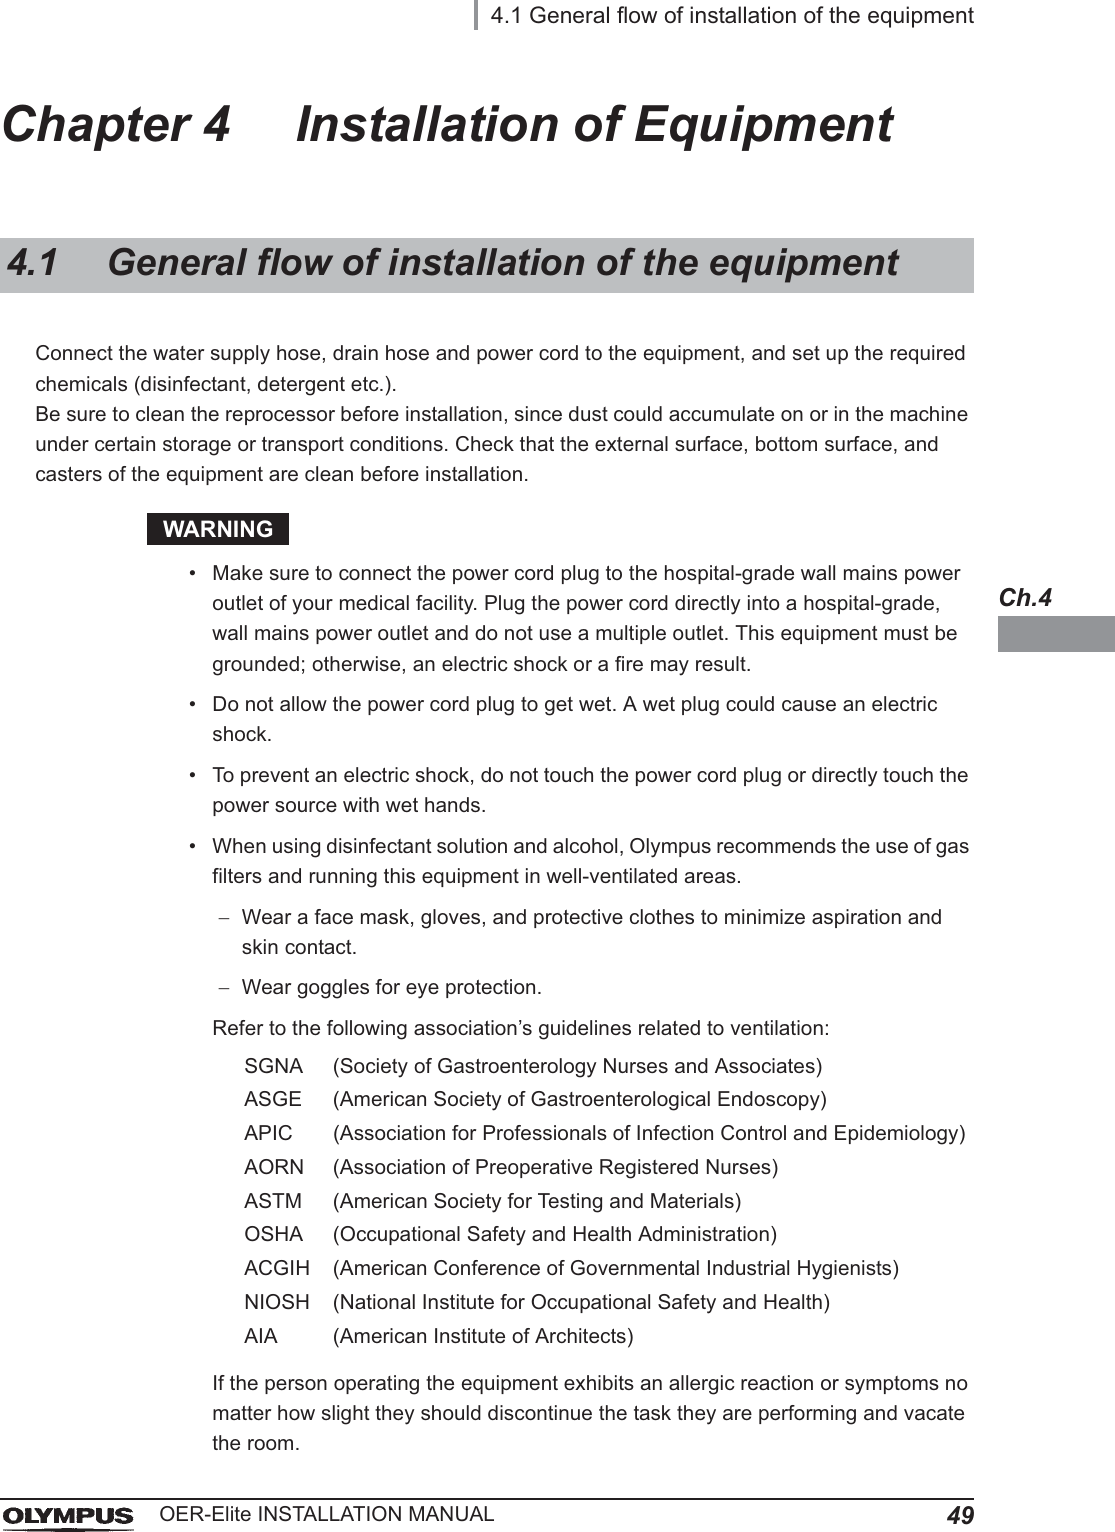 4.1 General flow of installation of the equipment49OER-Elite INSTALLATION MANUALCh.4Chapter 4 Installation of EquipmentConnect the water supply hose, drain hose and power cord to the equipment, and set up the required chemicals (disinfectant, detergent etc.).Be sure to clean the reprocessor before installation, since dust could accumulate on or in the machine under certain storage or transport conditions. Check that the external surface, bottom surface, and casters of the equipment are clean before installation.WARNING• Make sure to connect the power cord plug to the hospital-grade wall mains power outlet of your medical facility. Plug the power cord directly into a hospital-grade, wall mains power outlet and do not use a multiple outlet. This equipment must be grounded; otherwise, an electric shock or a fire may result.• Do not allow the power cord plug to get wet. A wet plug could cause an electric shock.• To prevent an electric shock, do not touch the power cord plug or directly touch the power source with wet hands.• When using disinfectant solution and alcohol, Olympus recommends the use of gas filters and running this equipment in well-ventilated areas.Wear a face mask, gloves, and protective clothes to minimize aspiration and skin contact.Wear goggles for eye protection.Refer to the following association’s guidelines related to ventilation:If the person operating the equipment exhibits an allergic reaction or symptoms no matter how slight they should discontinue the task they are performing and vacate the room.4.1 General flow of installation of the equipmentSGNA (Society of Gastroenterology Nurses and Associates)ASGE (American Society of Gastroenterological Endoscopy)APIC (Association for Professionals of Infection Control and Epidemiology)AORN (Association of Preoperative Registered Nurses)ASTM (American Society for Testing and Materials)OSHA (Occupational Safety and Health Administration)ACGIH (American Conference of Governmental Industrial Hygienists)NIOSH (National Institute for Occupational Safety and Health)AIA (American Institute of Architects)